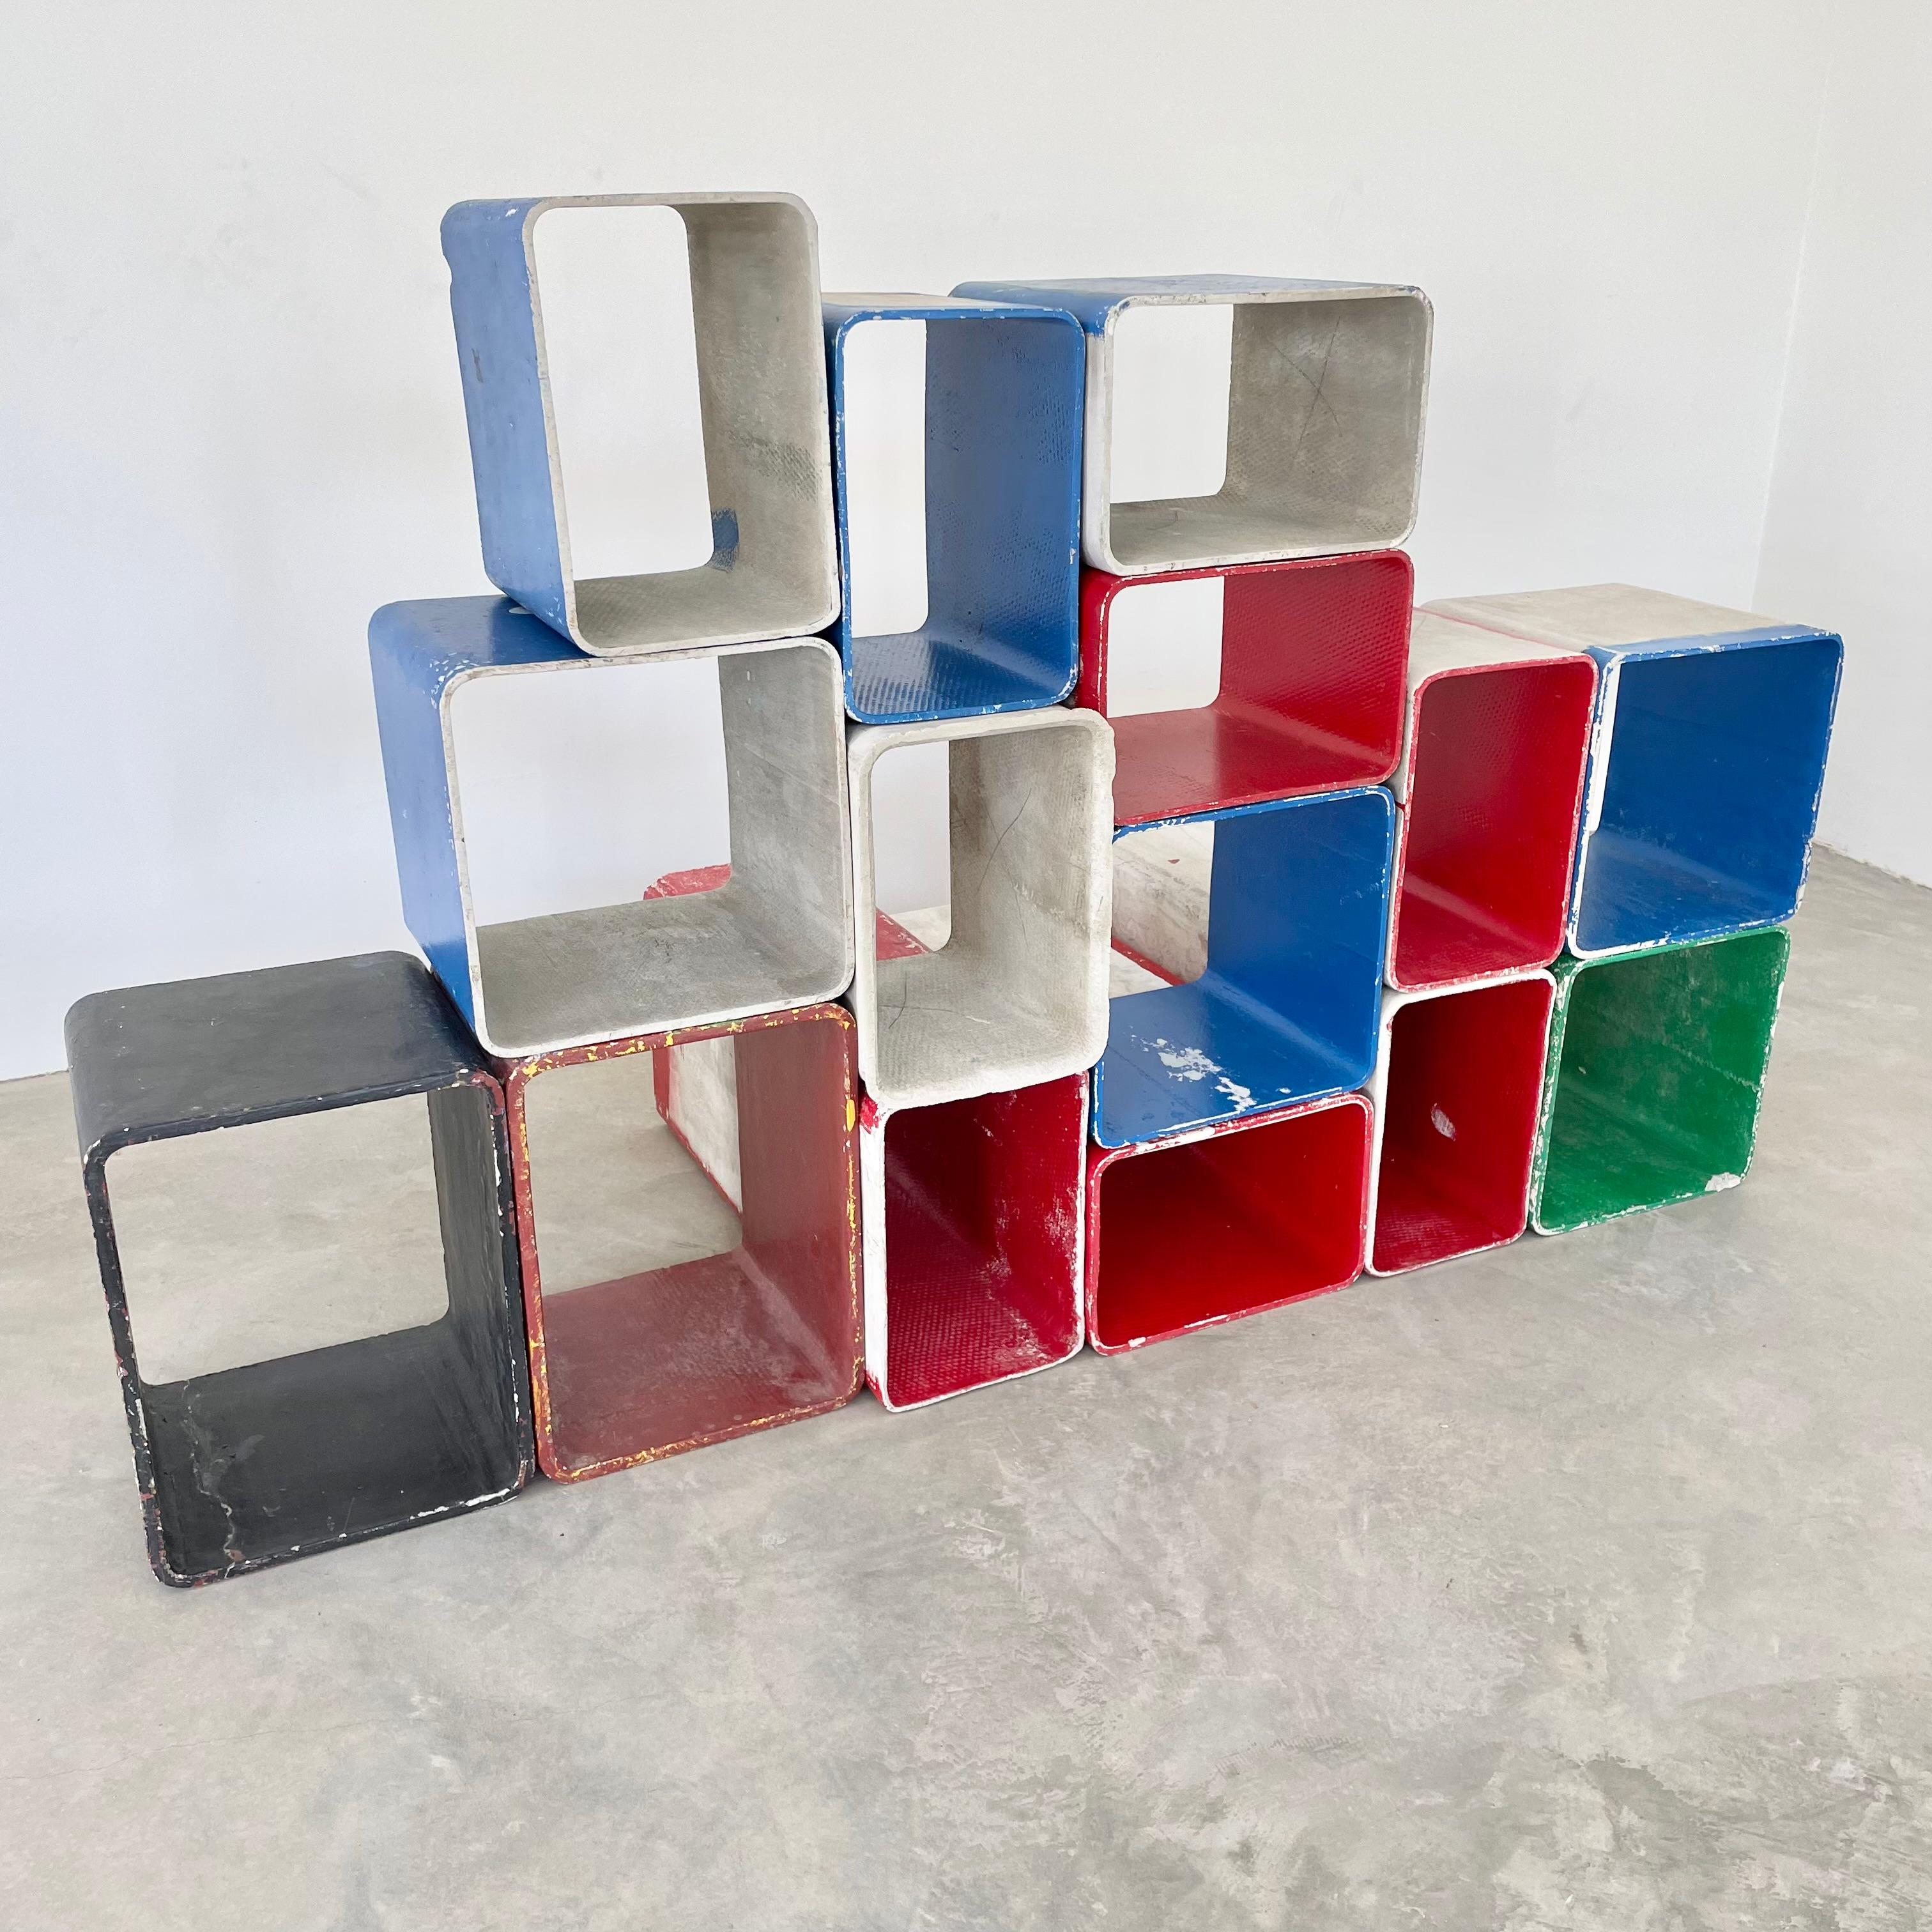 Sculptural set of painted concrete cubes by Swiss architect Willy Guhl. Handmade in the early 1960s in Switzerland. Produced by Eternit. Red, blue, green, white and black coloring. Can be arranged in a multitude of ways. Perfect bookcase, room